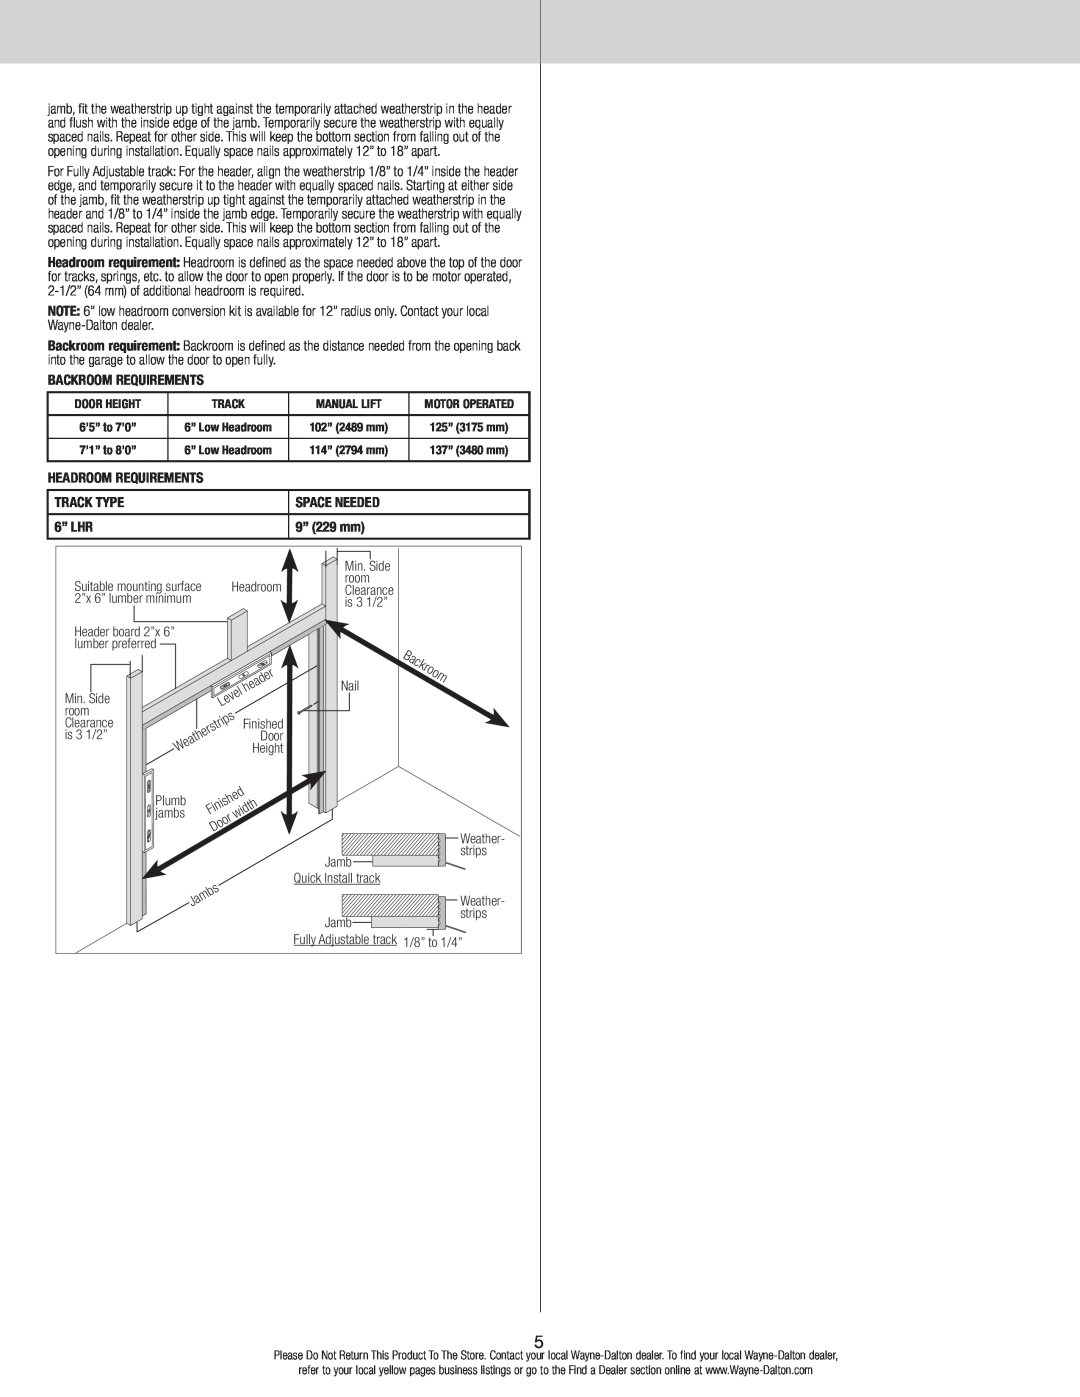 Wayne-Dalton 346919 Backroom Requirements, Headroom Requirements, Track Type, Space Needed, 6” LHR, 9” 229 mm 